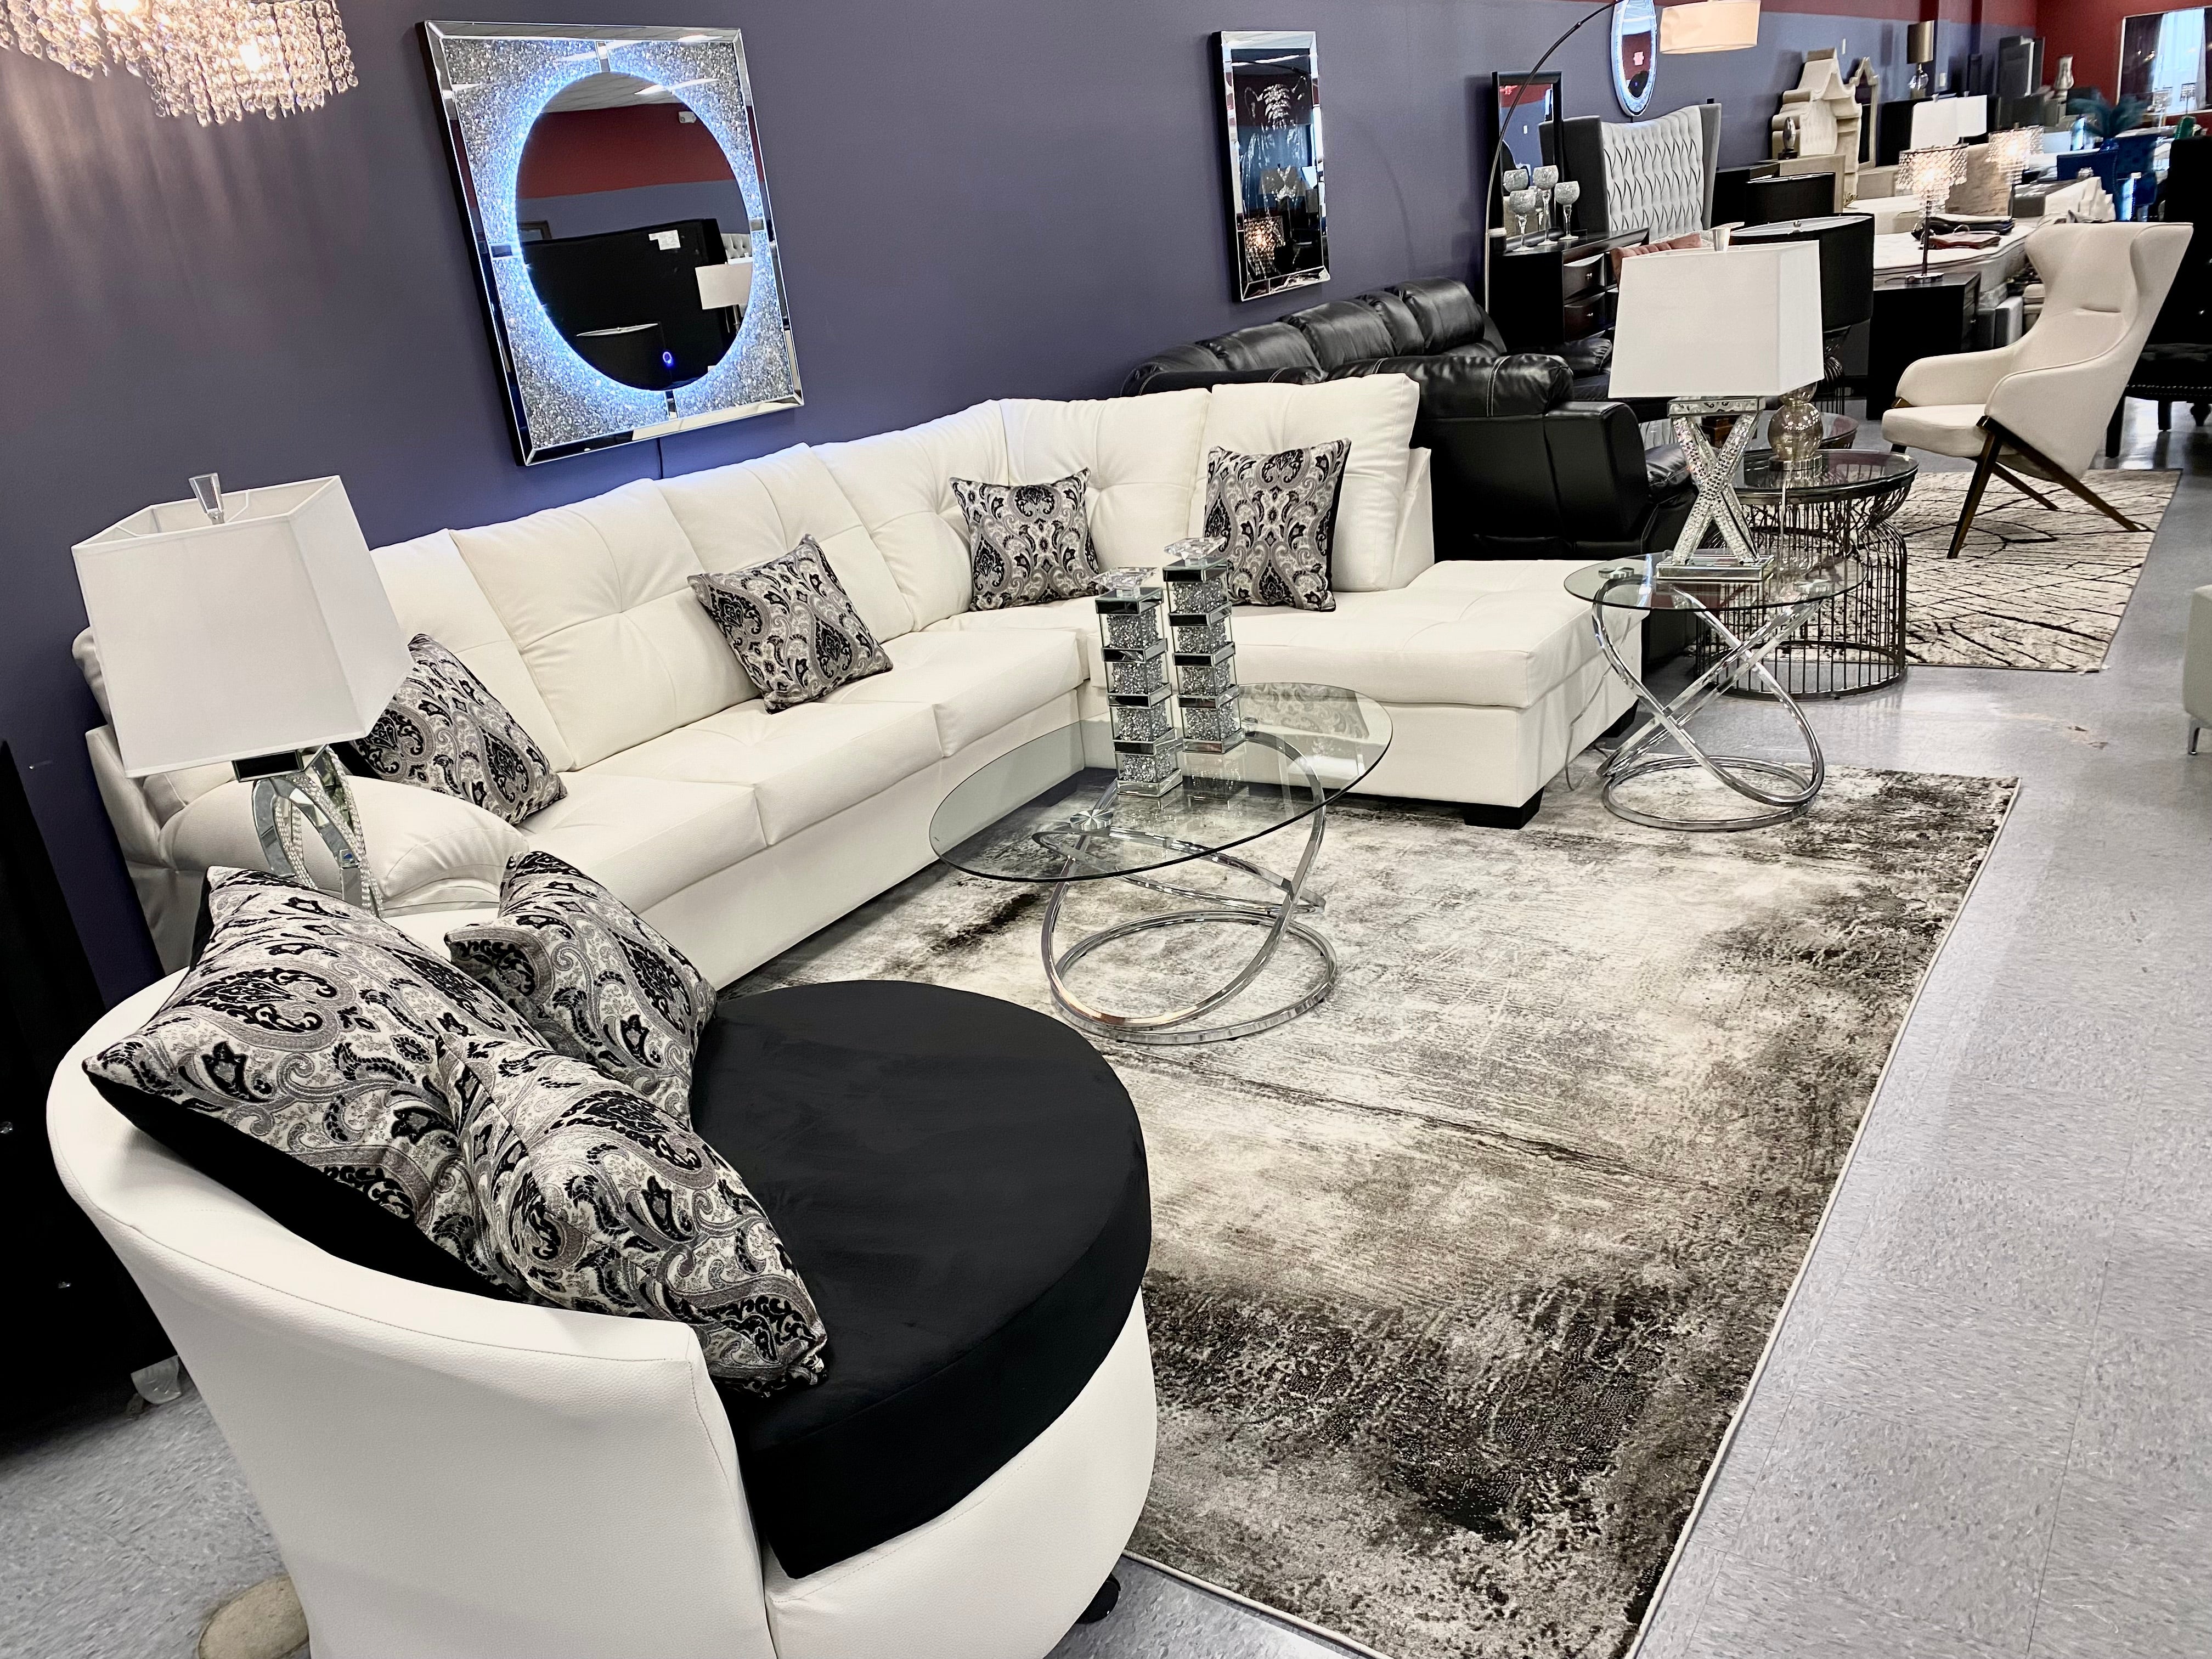 CRISTAL ROYALE OXFORD WHITE LEATHER Upholstered Sectional Sofa in ** Available In Over 500 in house Colors and Patterns to Choose From, ** Custom Made To Order ** Design It Your Way